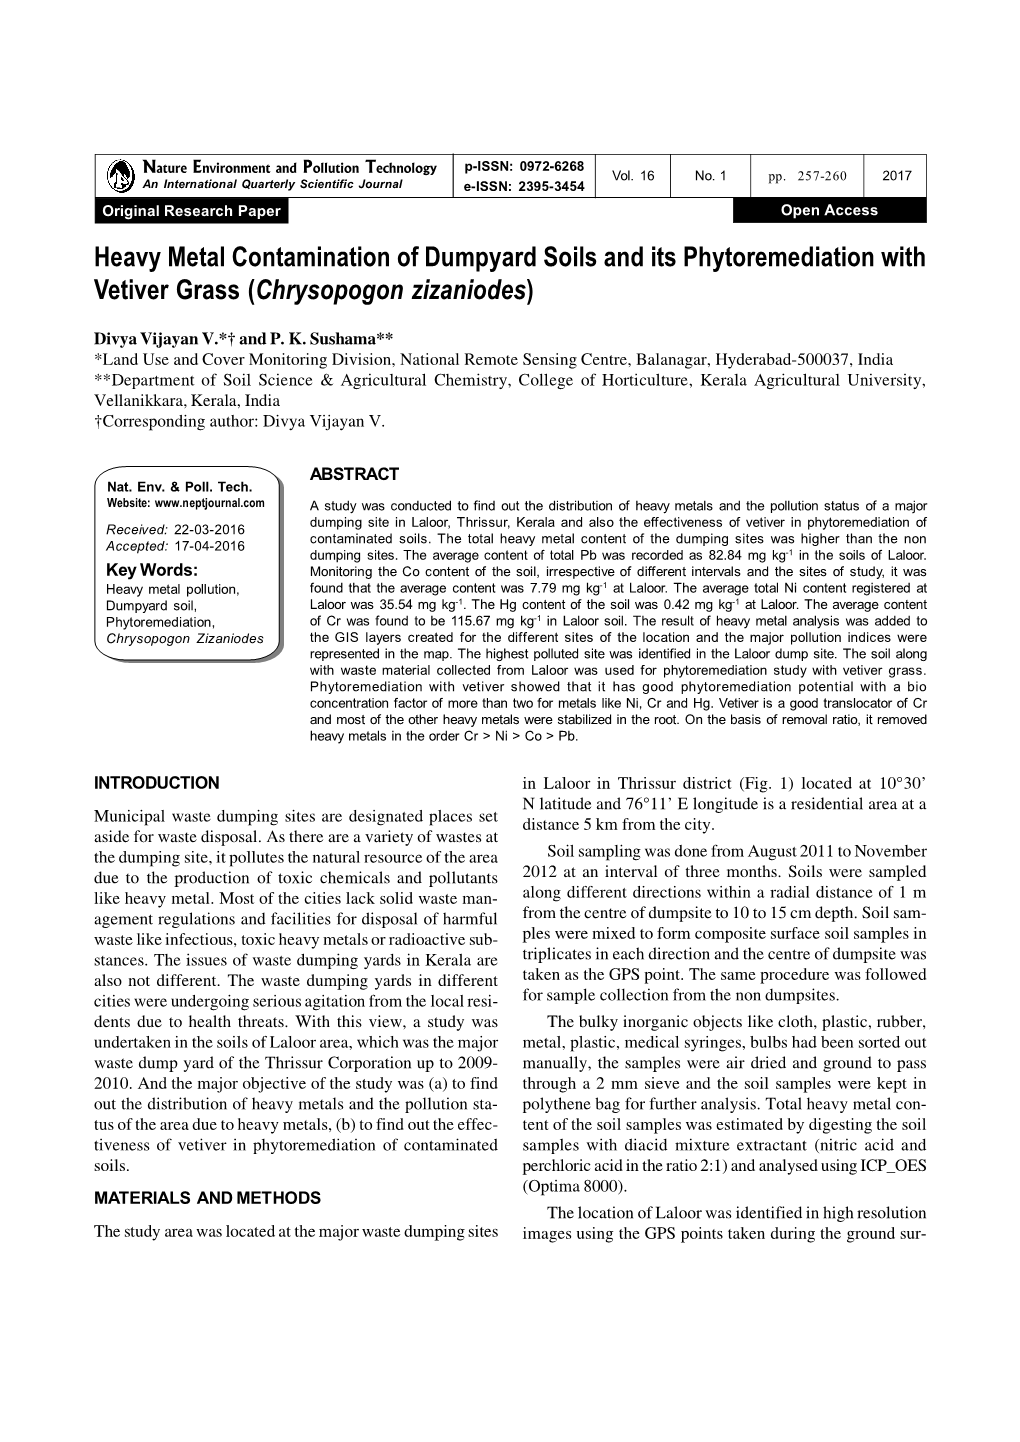 Heavy Metal Contamination of Dumpyard Soils and Its Phytoremediation with Vetiver Grass (Chrysopogon Zizaniodes)